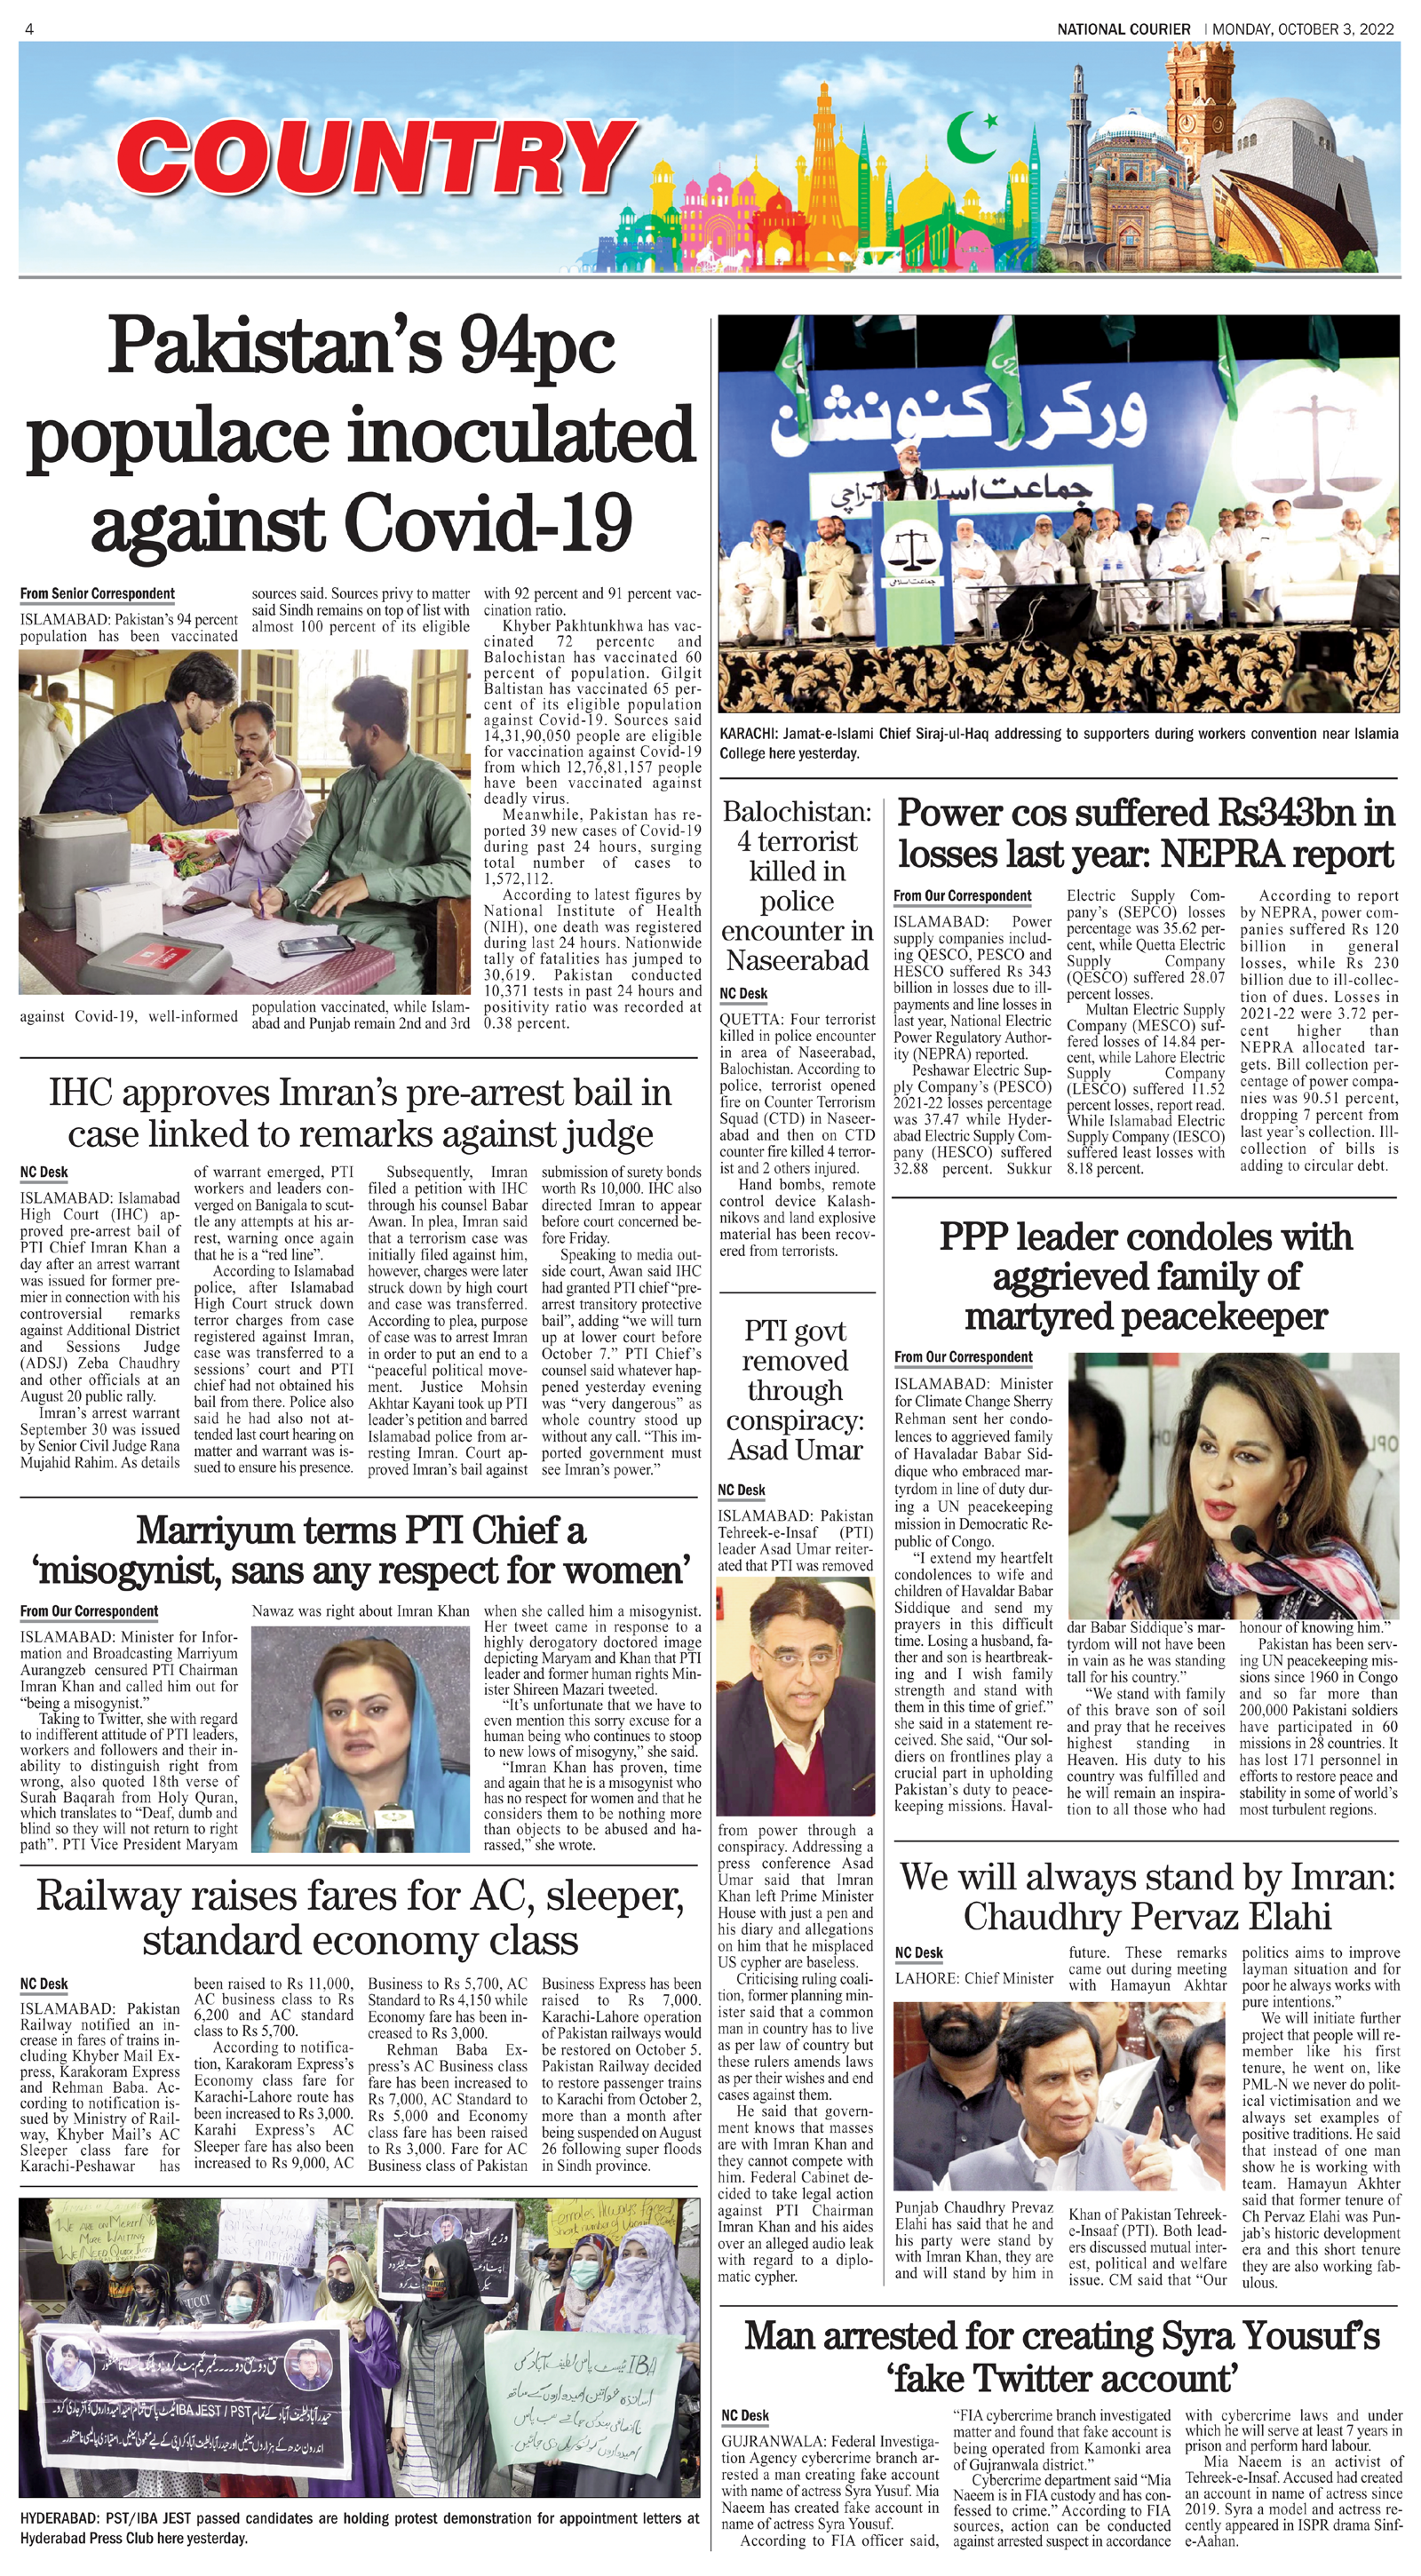 DNC-ePaper | 03 October, 2022 | Country